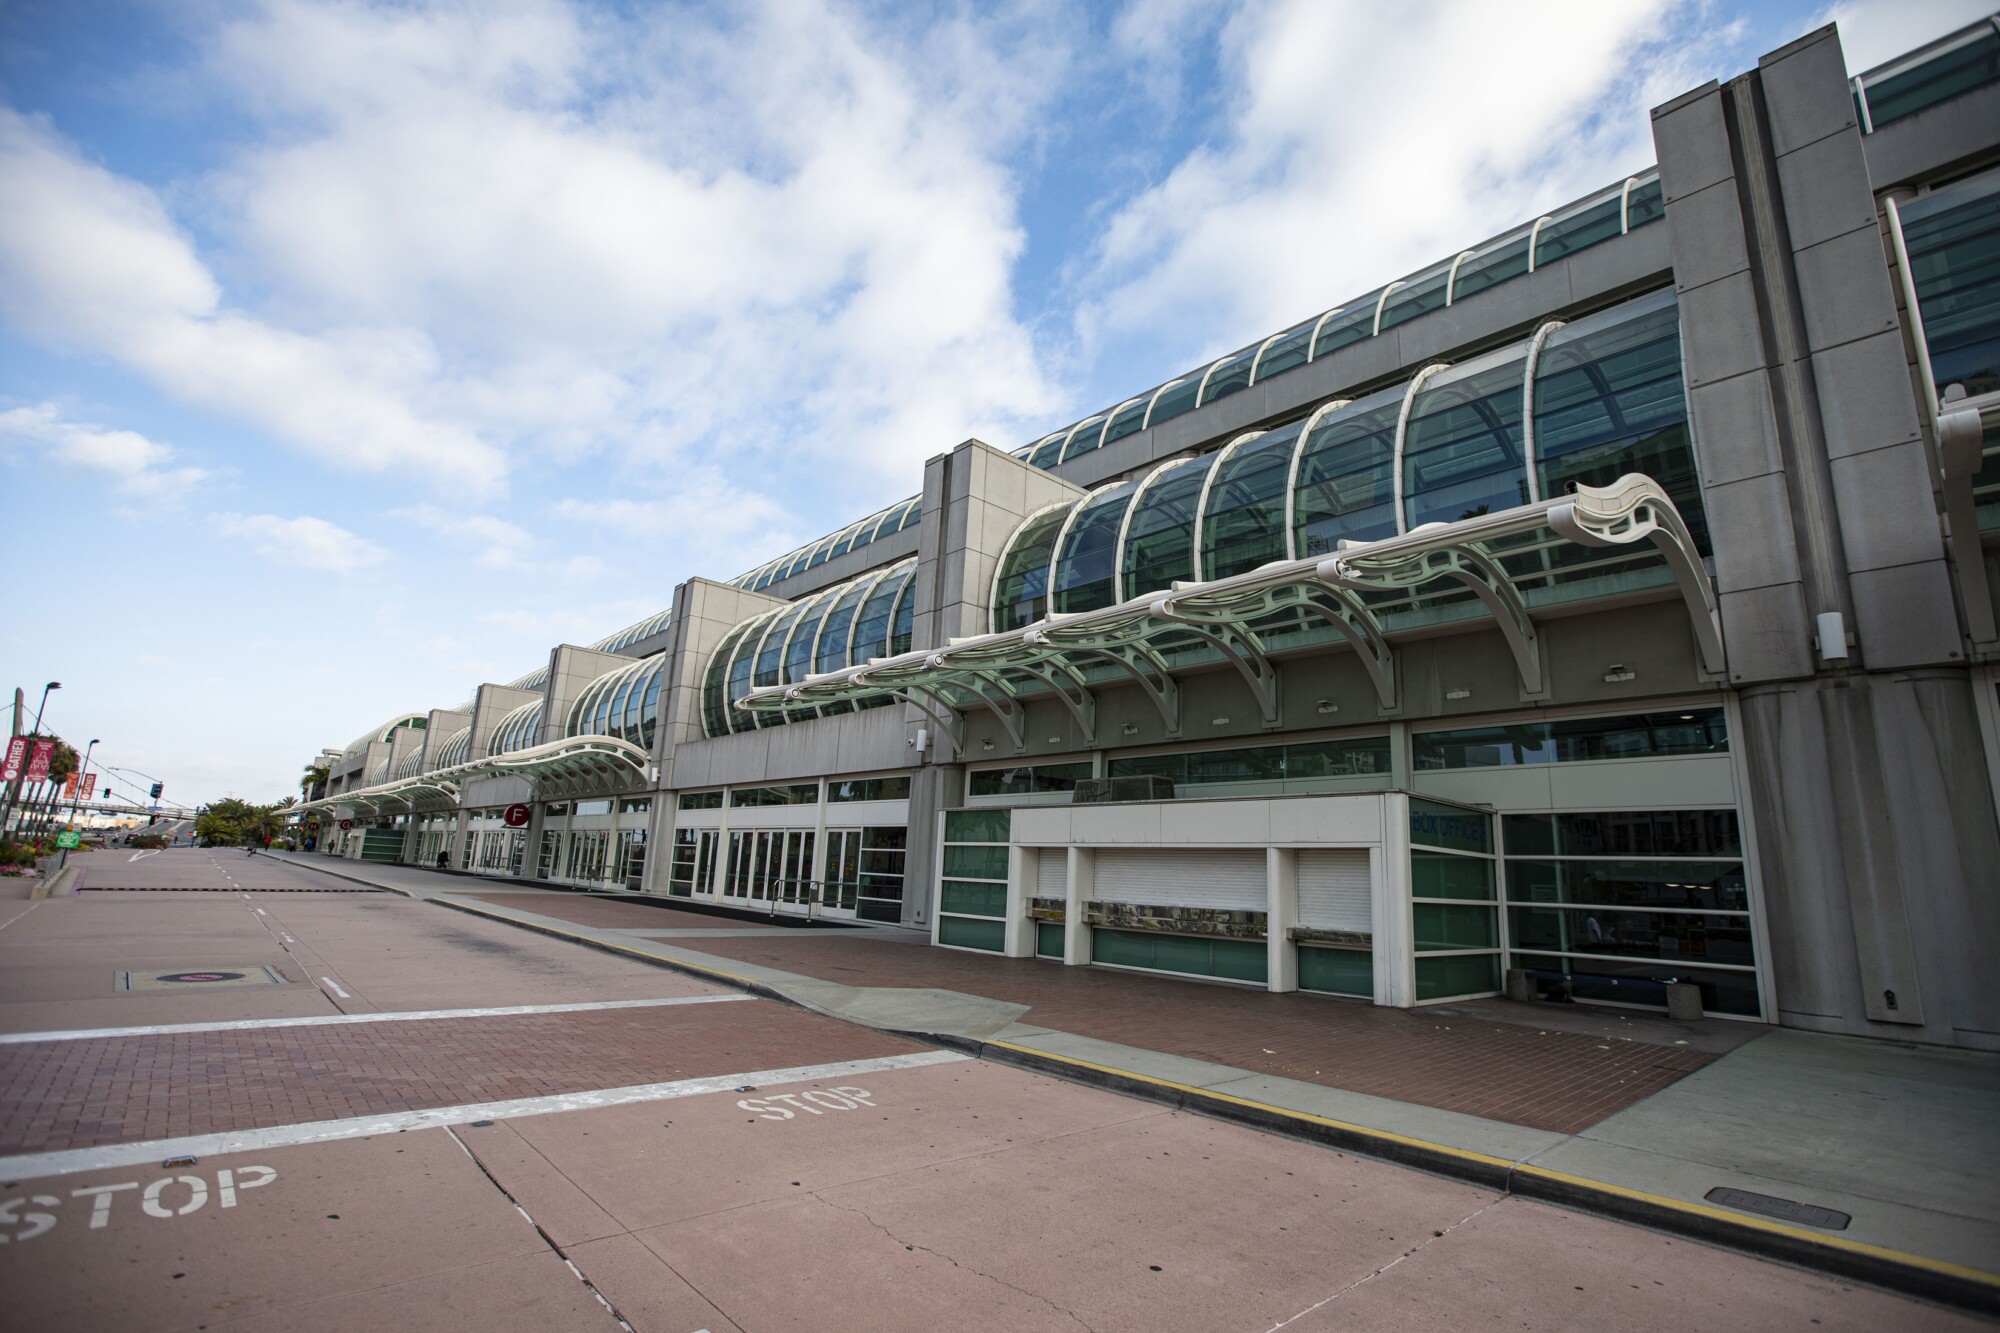 Biden Administration to Use San Diego Convention Center as Immigration Shelter Amid Surge